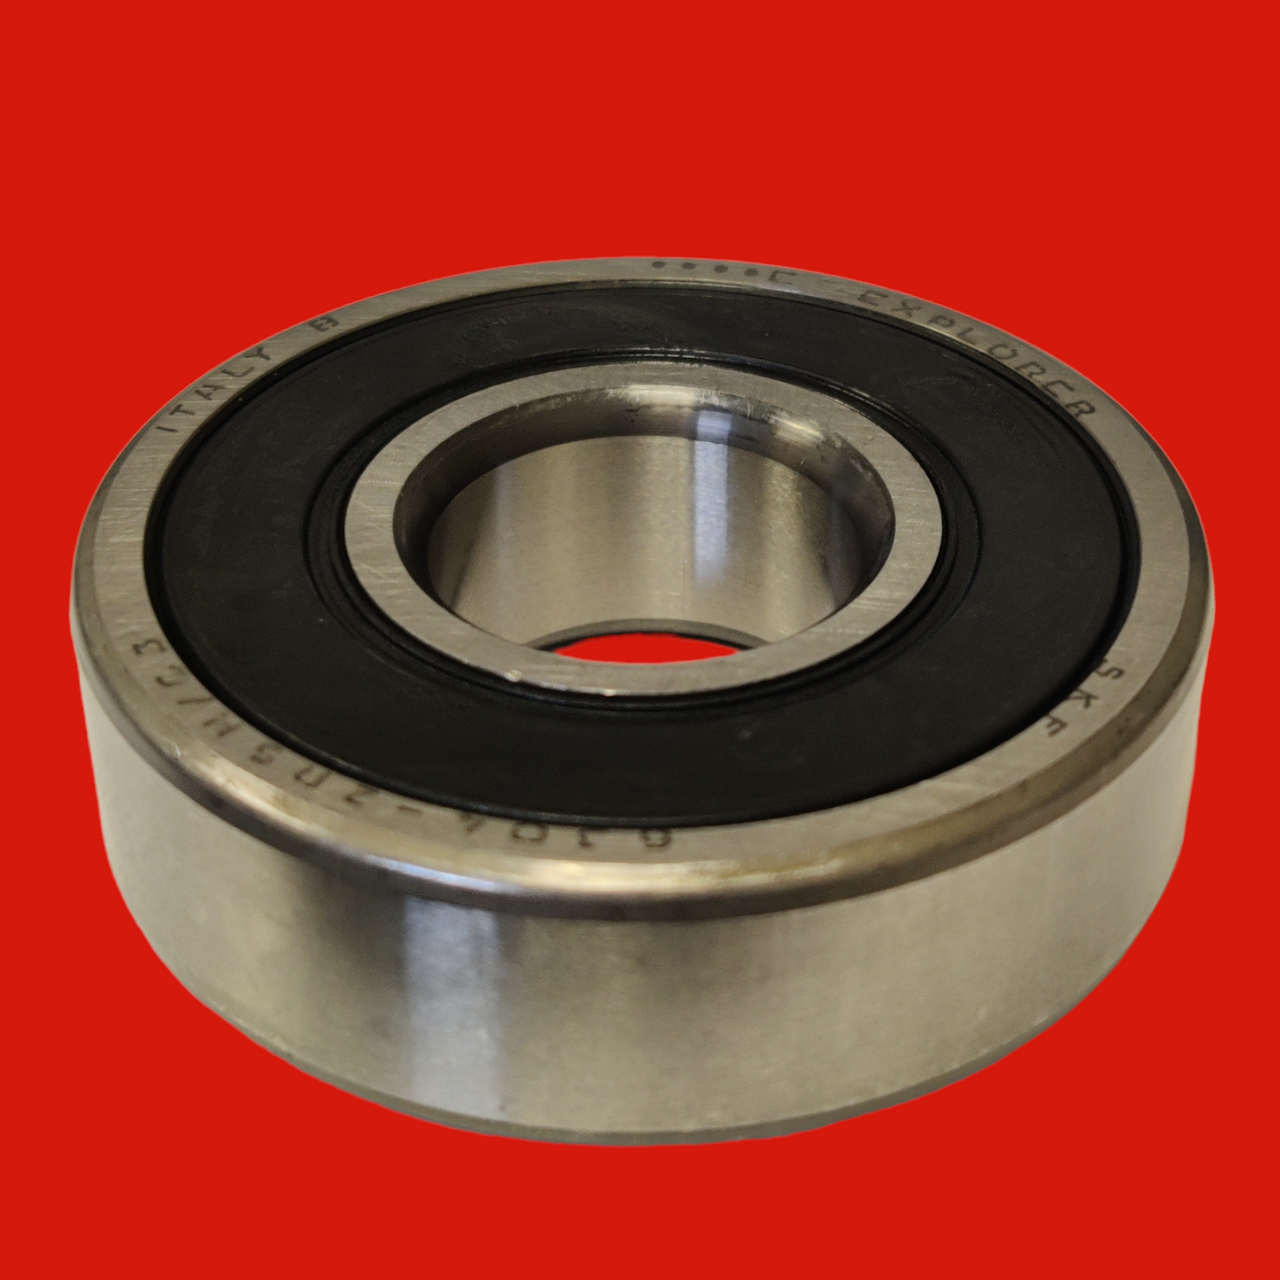 SKF 6304-2RSH/C3 Deep Groove Ball Bearing with Seals